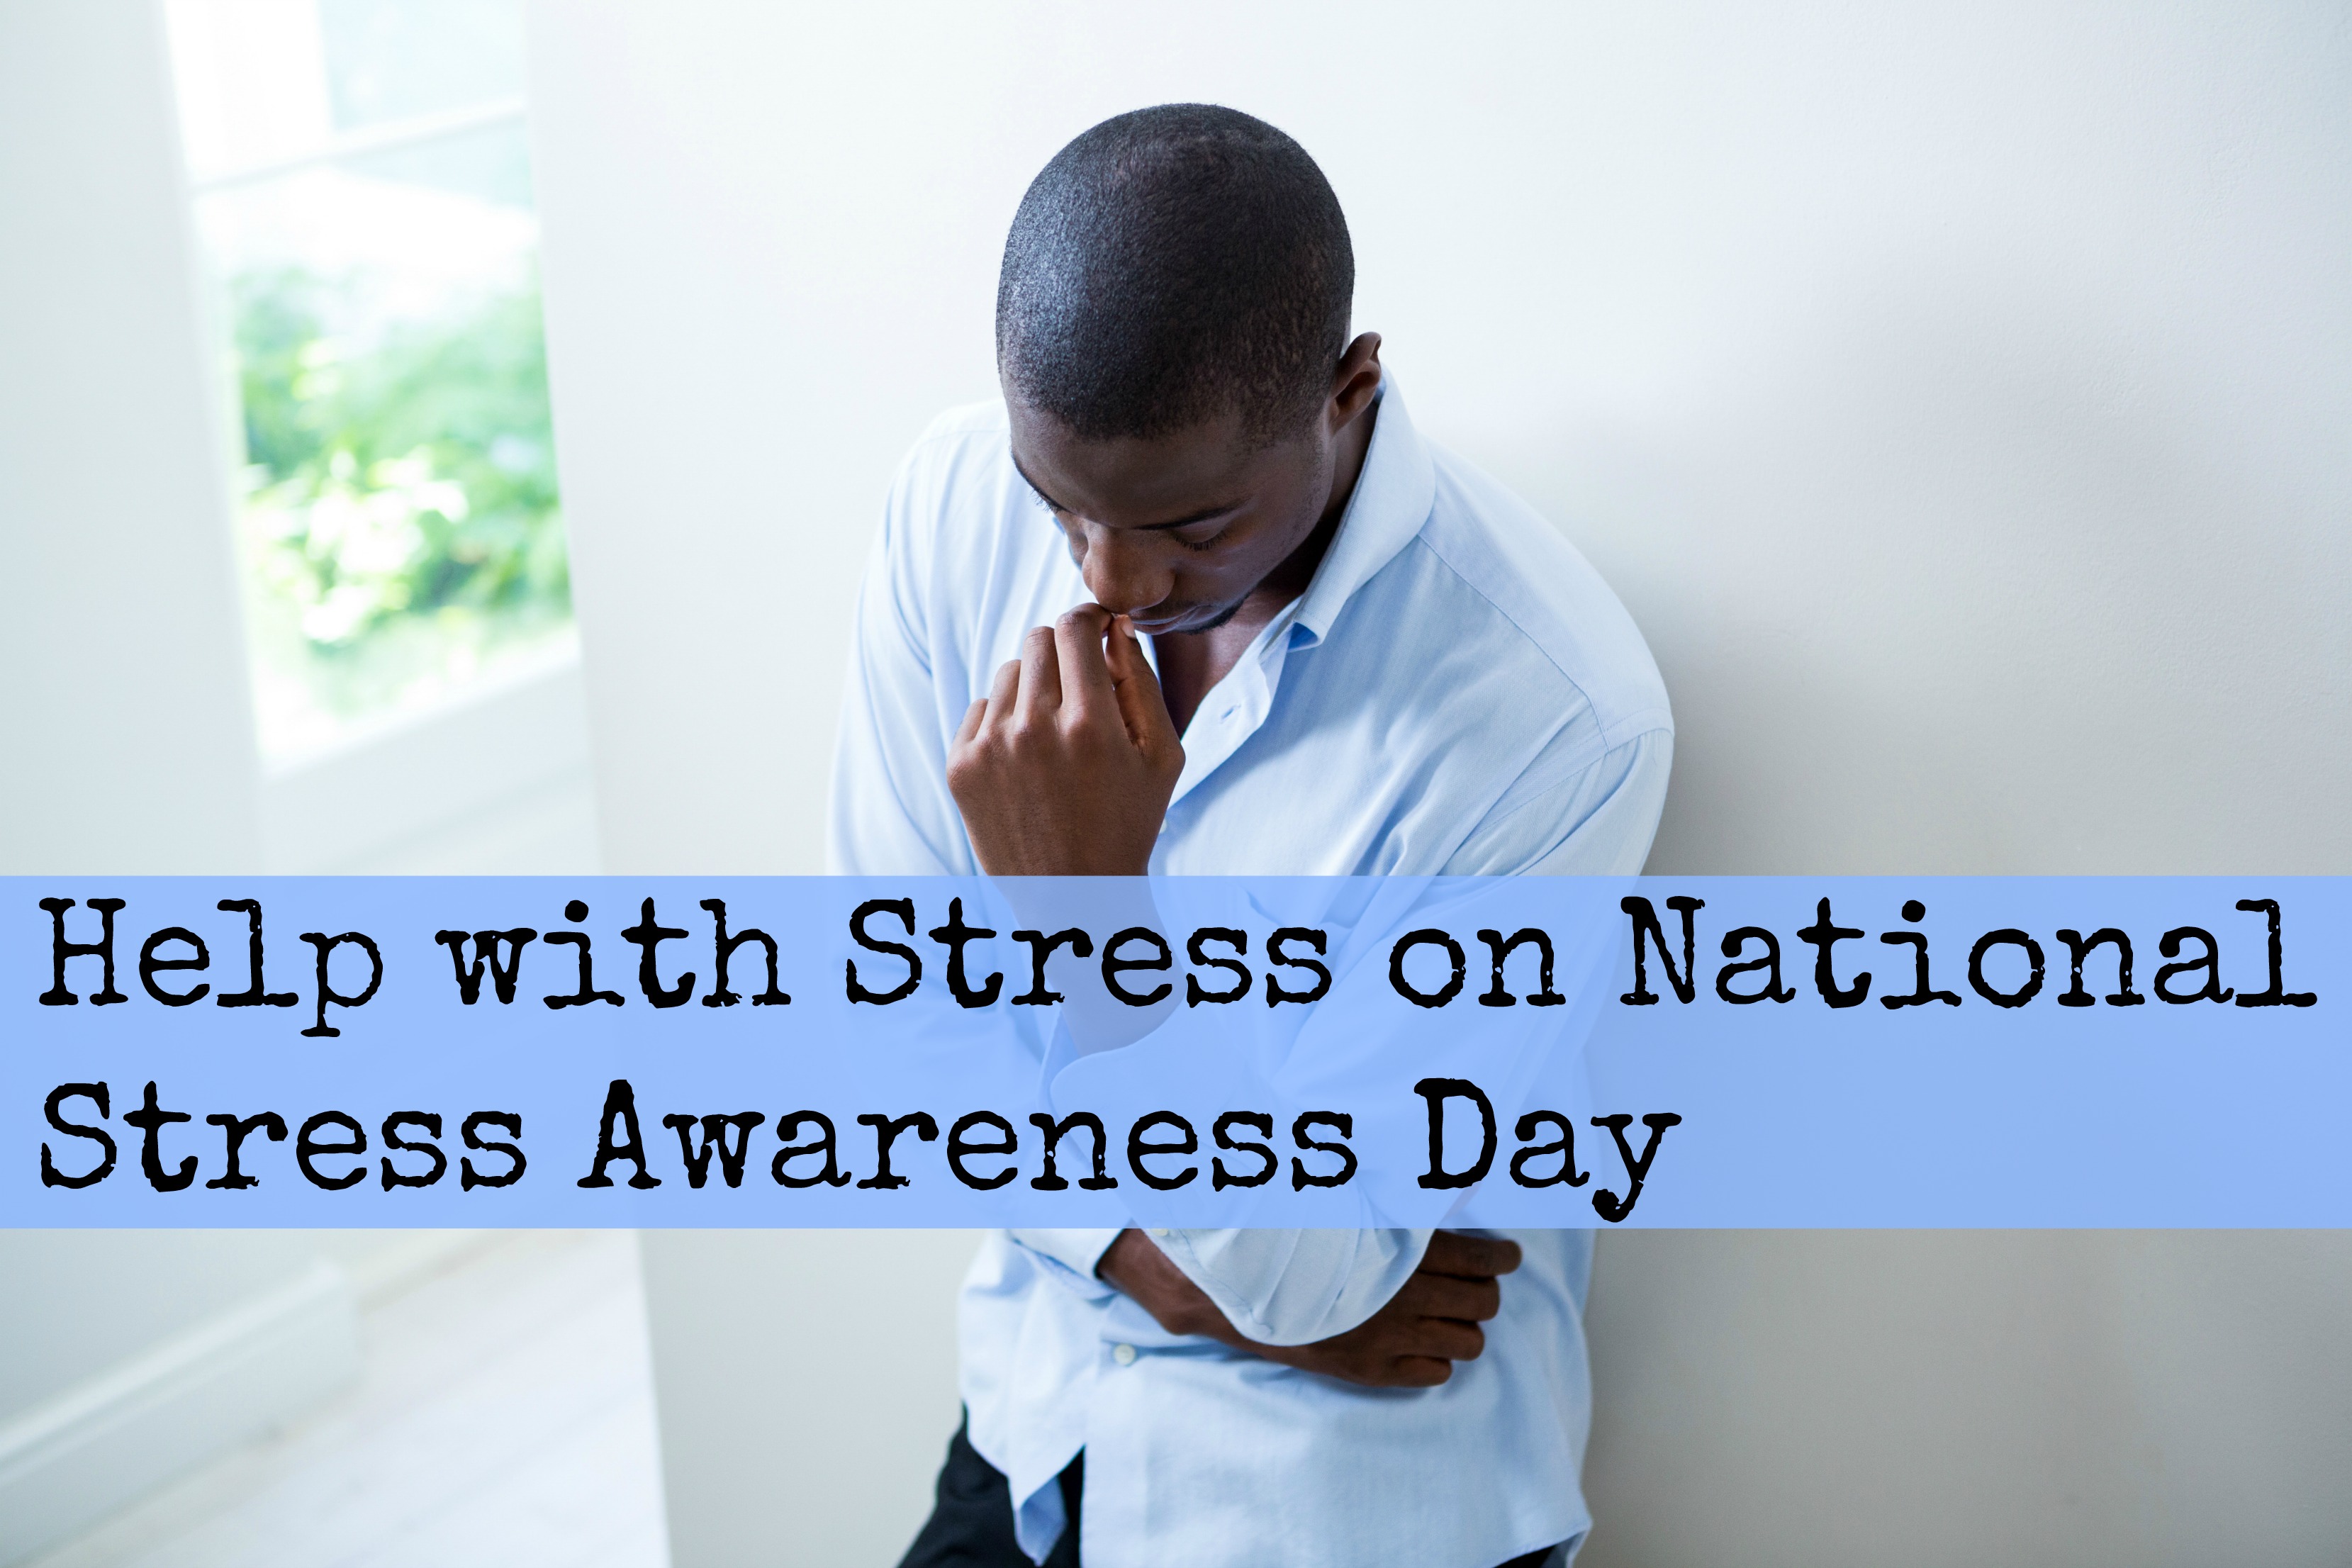 Help with Stress on National Stress Awareness Day